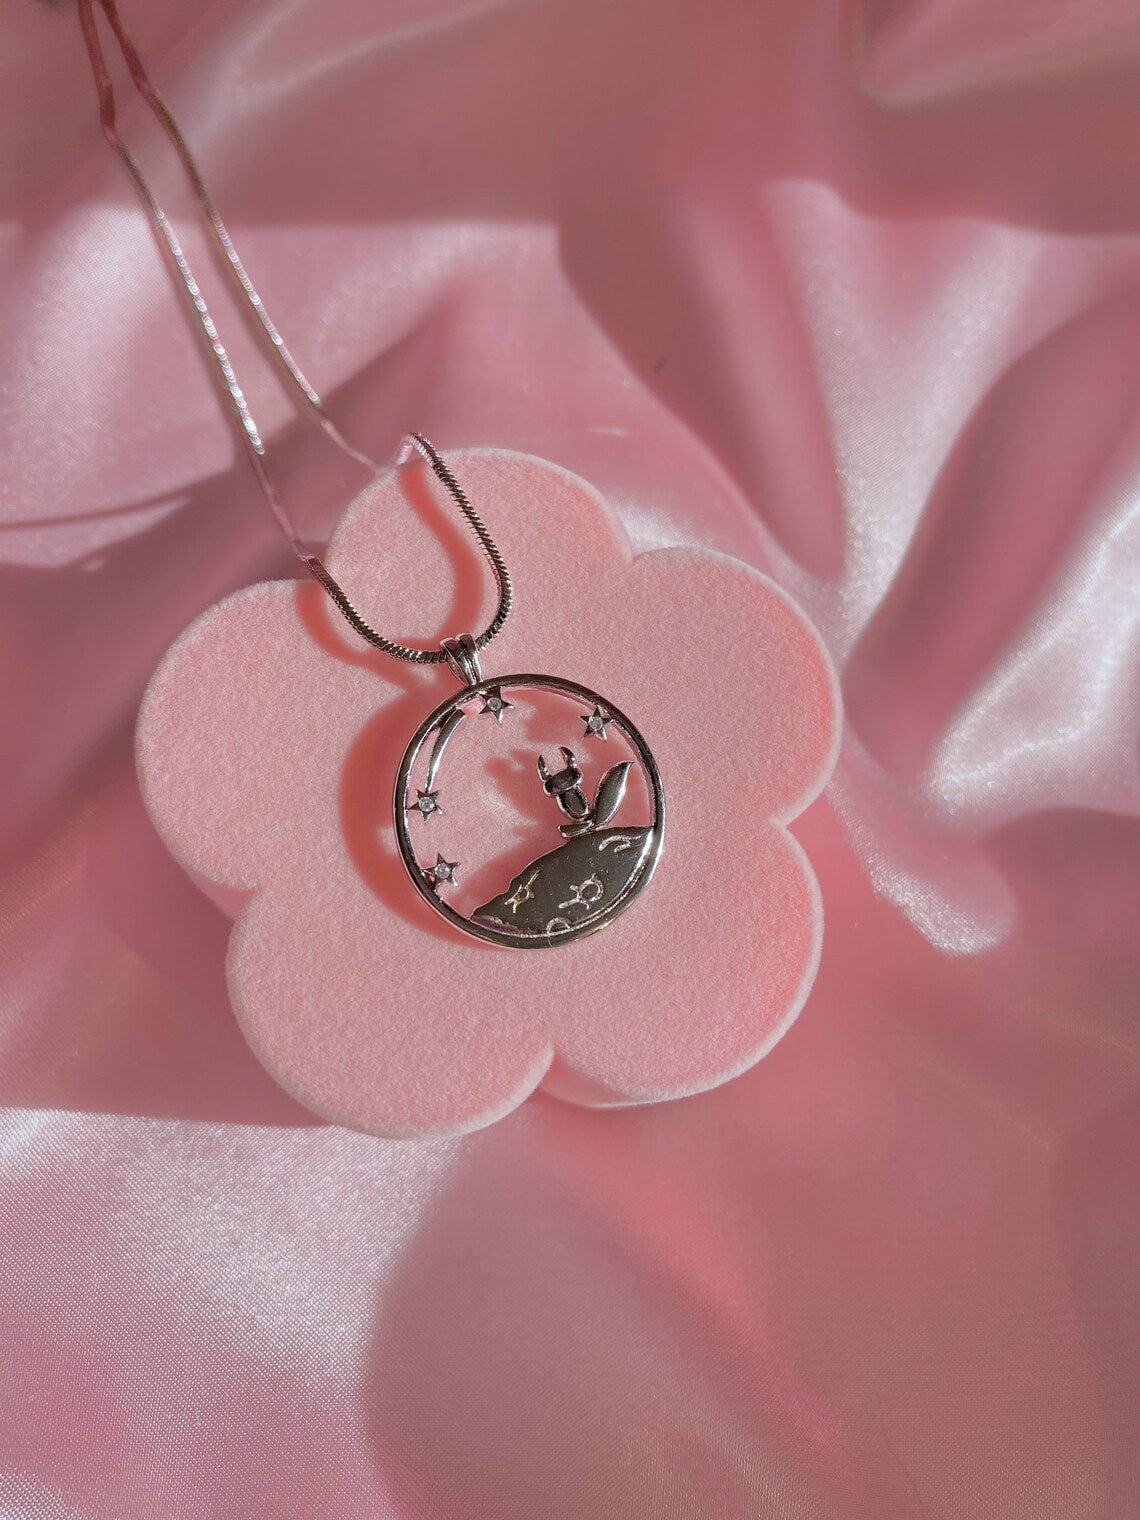 Couple Necklace Best friend Necklace, Little Prince and Red Fox-Little Prince Couple Necklace, Matching Necklace, Valentine's Day Gift